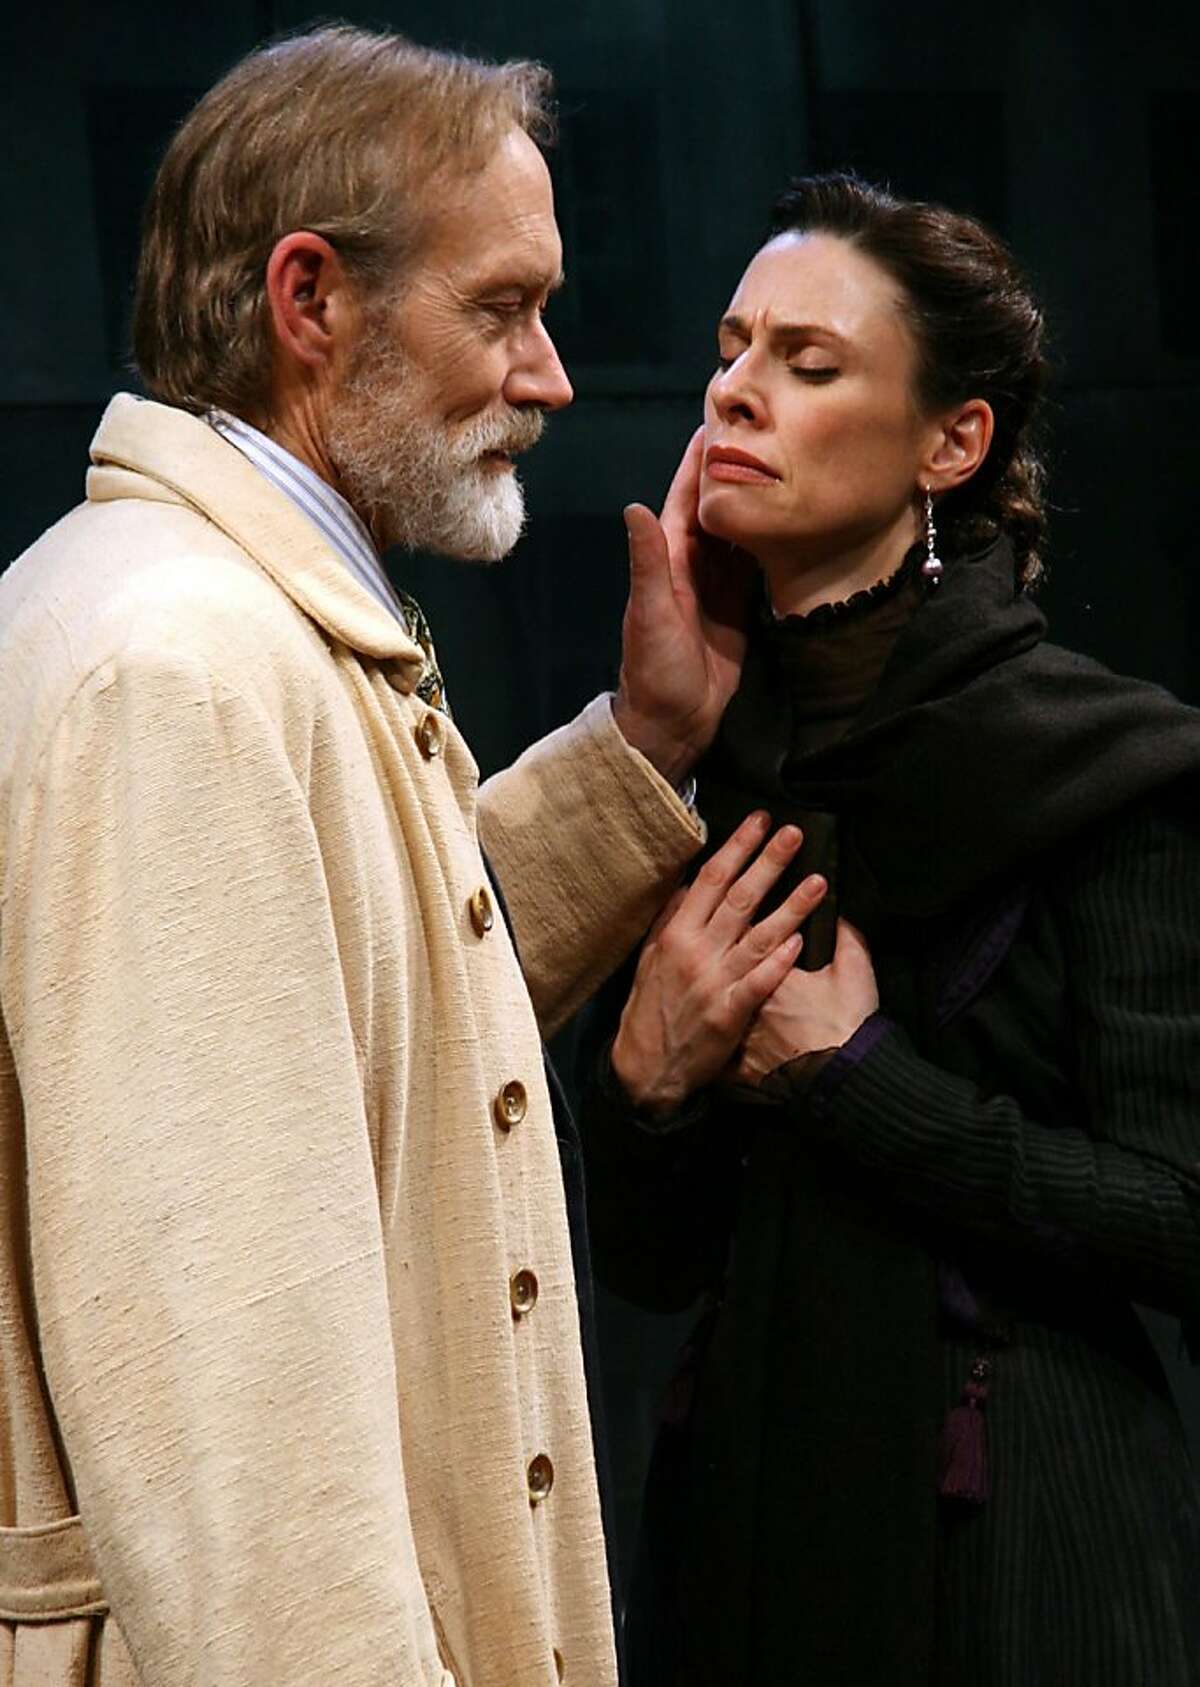 The Stranger (James Carpenter, left) consoles the Wife (Danielle O'Hare) after a terrible fire in "Burned House" in Cutting Ball Theater's "Strindberg Cycle"